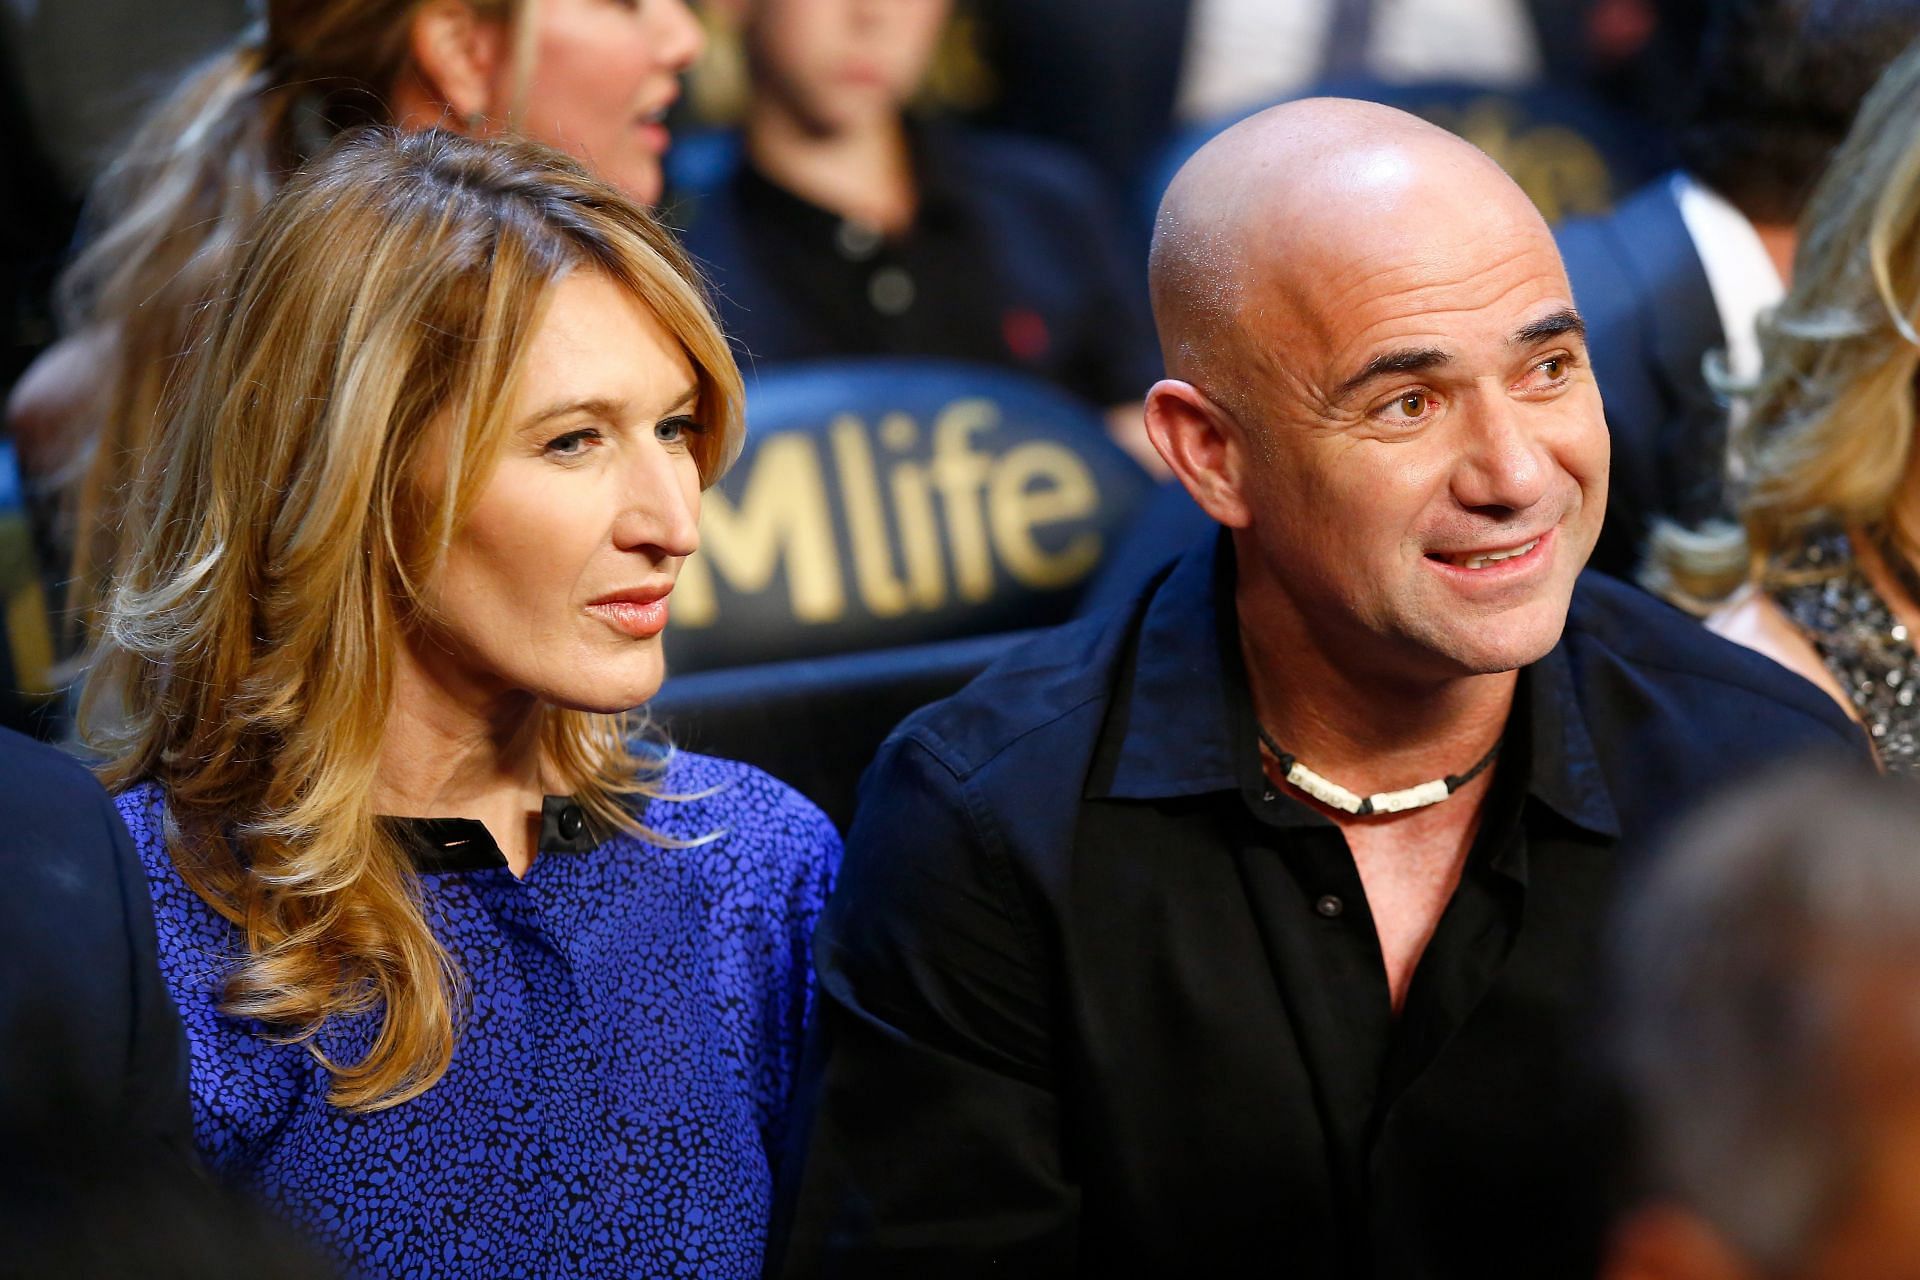 Steffi Graf and husband Andre Agassi pictured at an event in Las Vegas in 2015